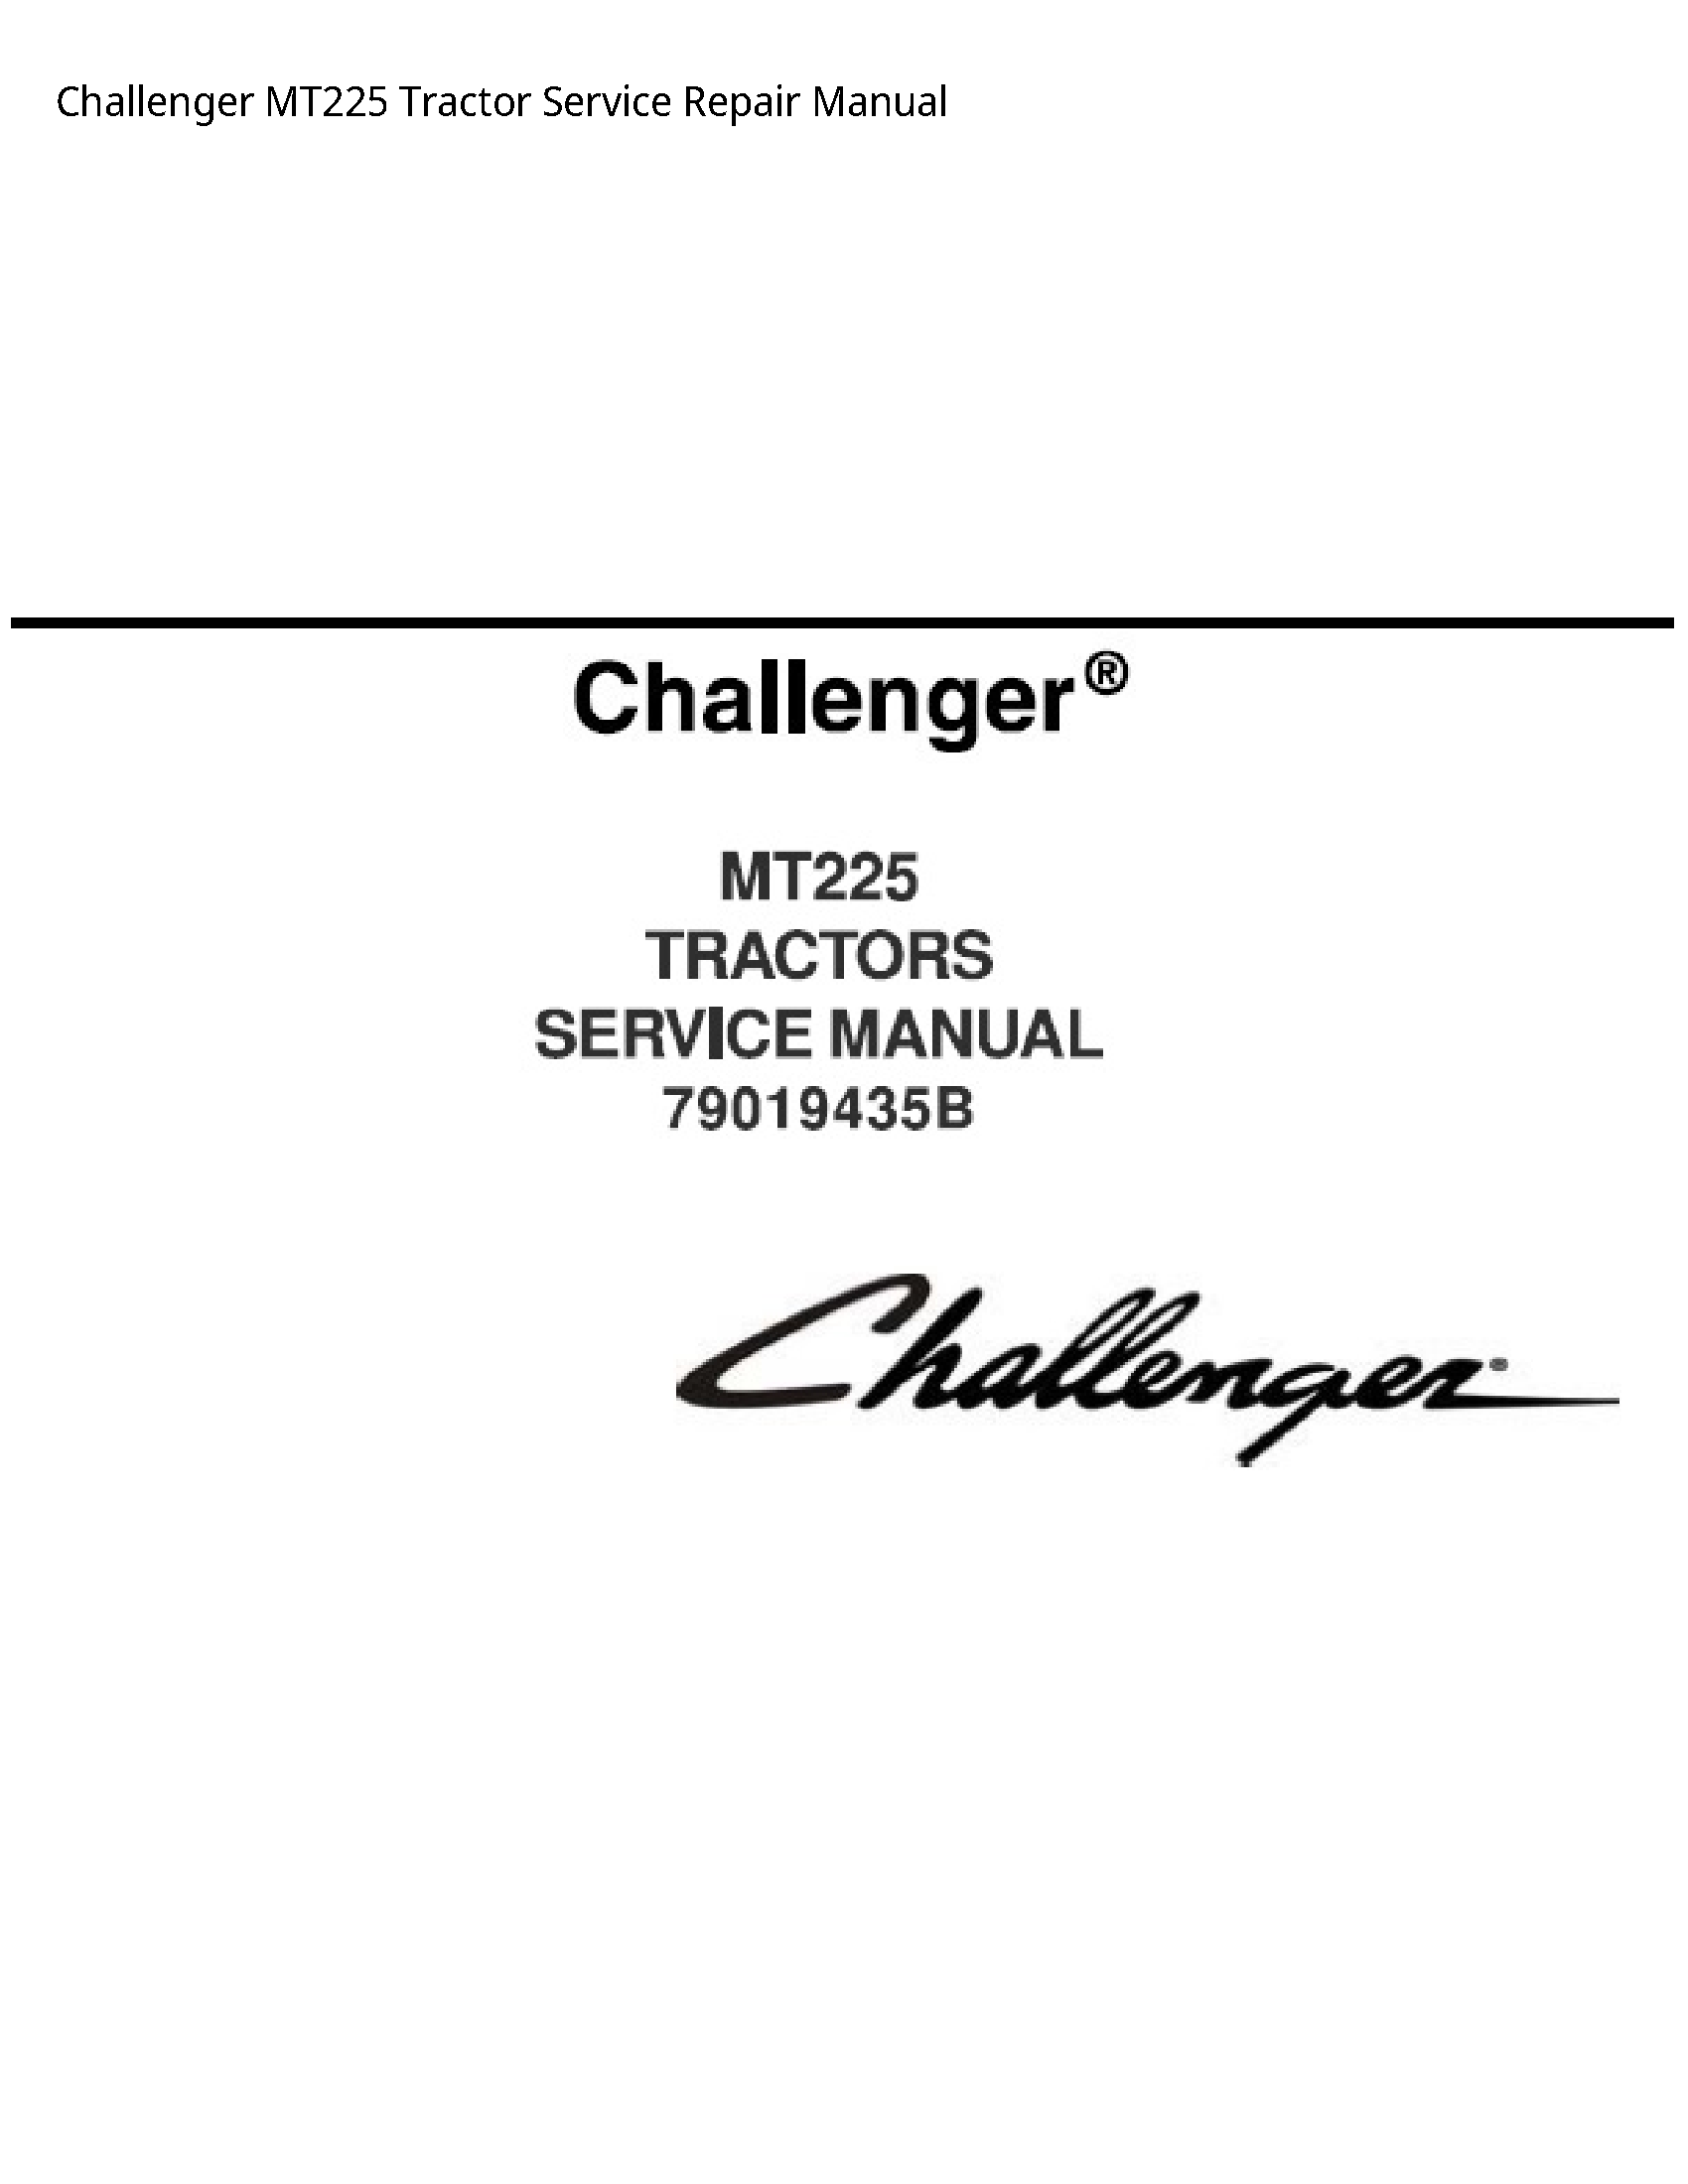 Challenger MT225 Tractor manual